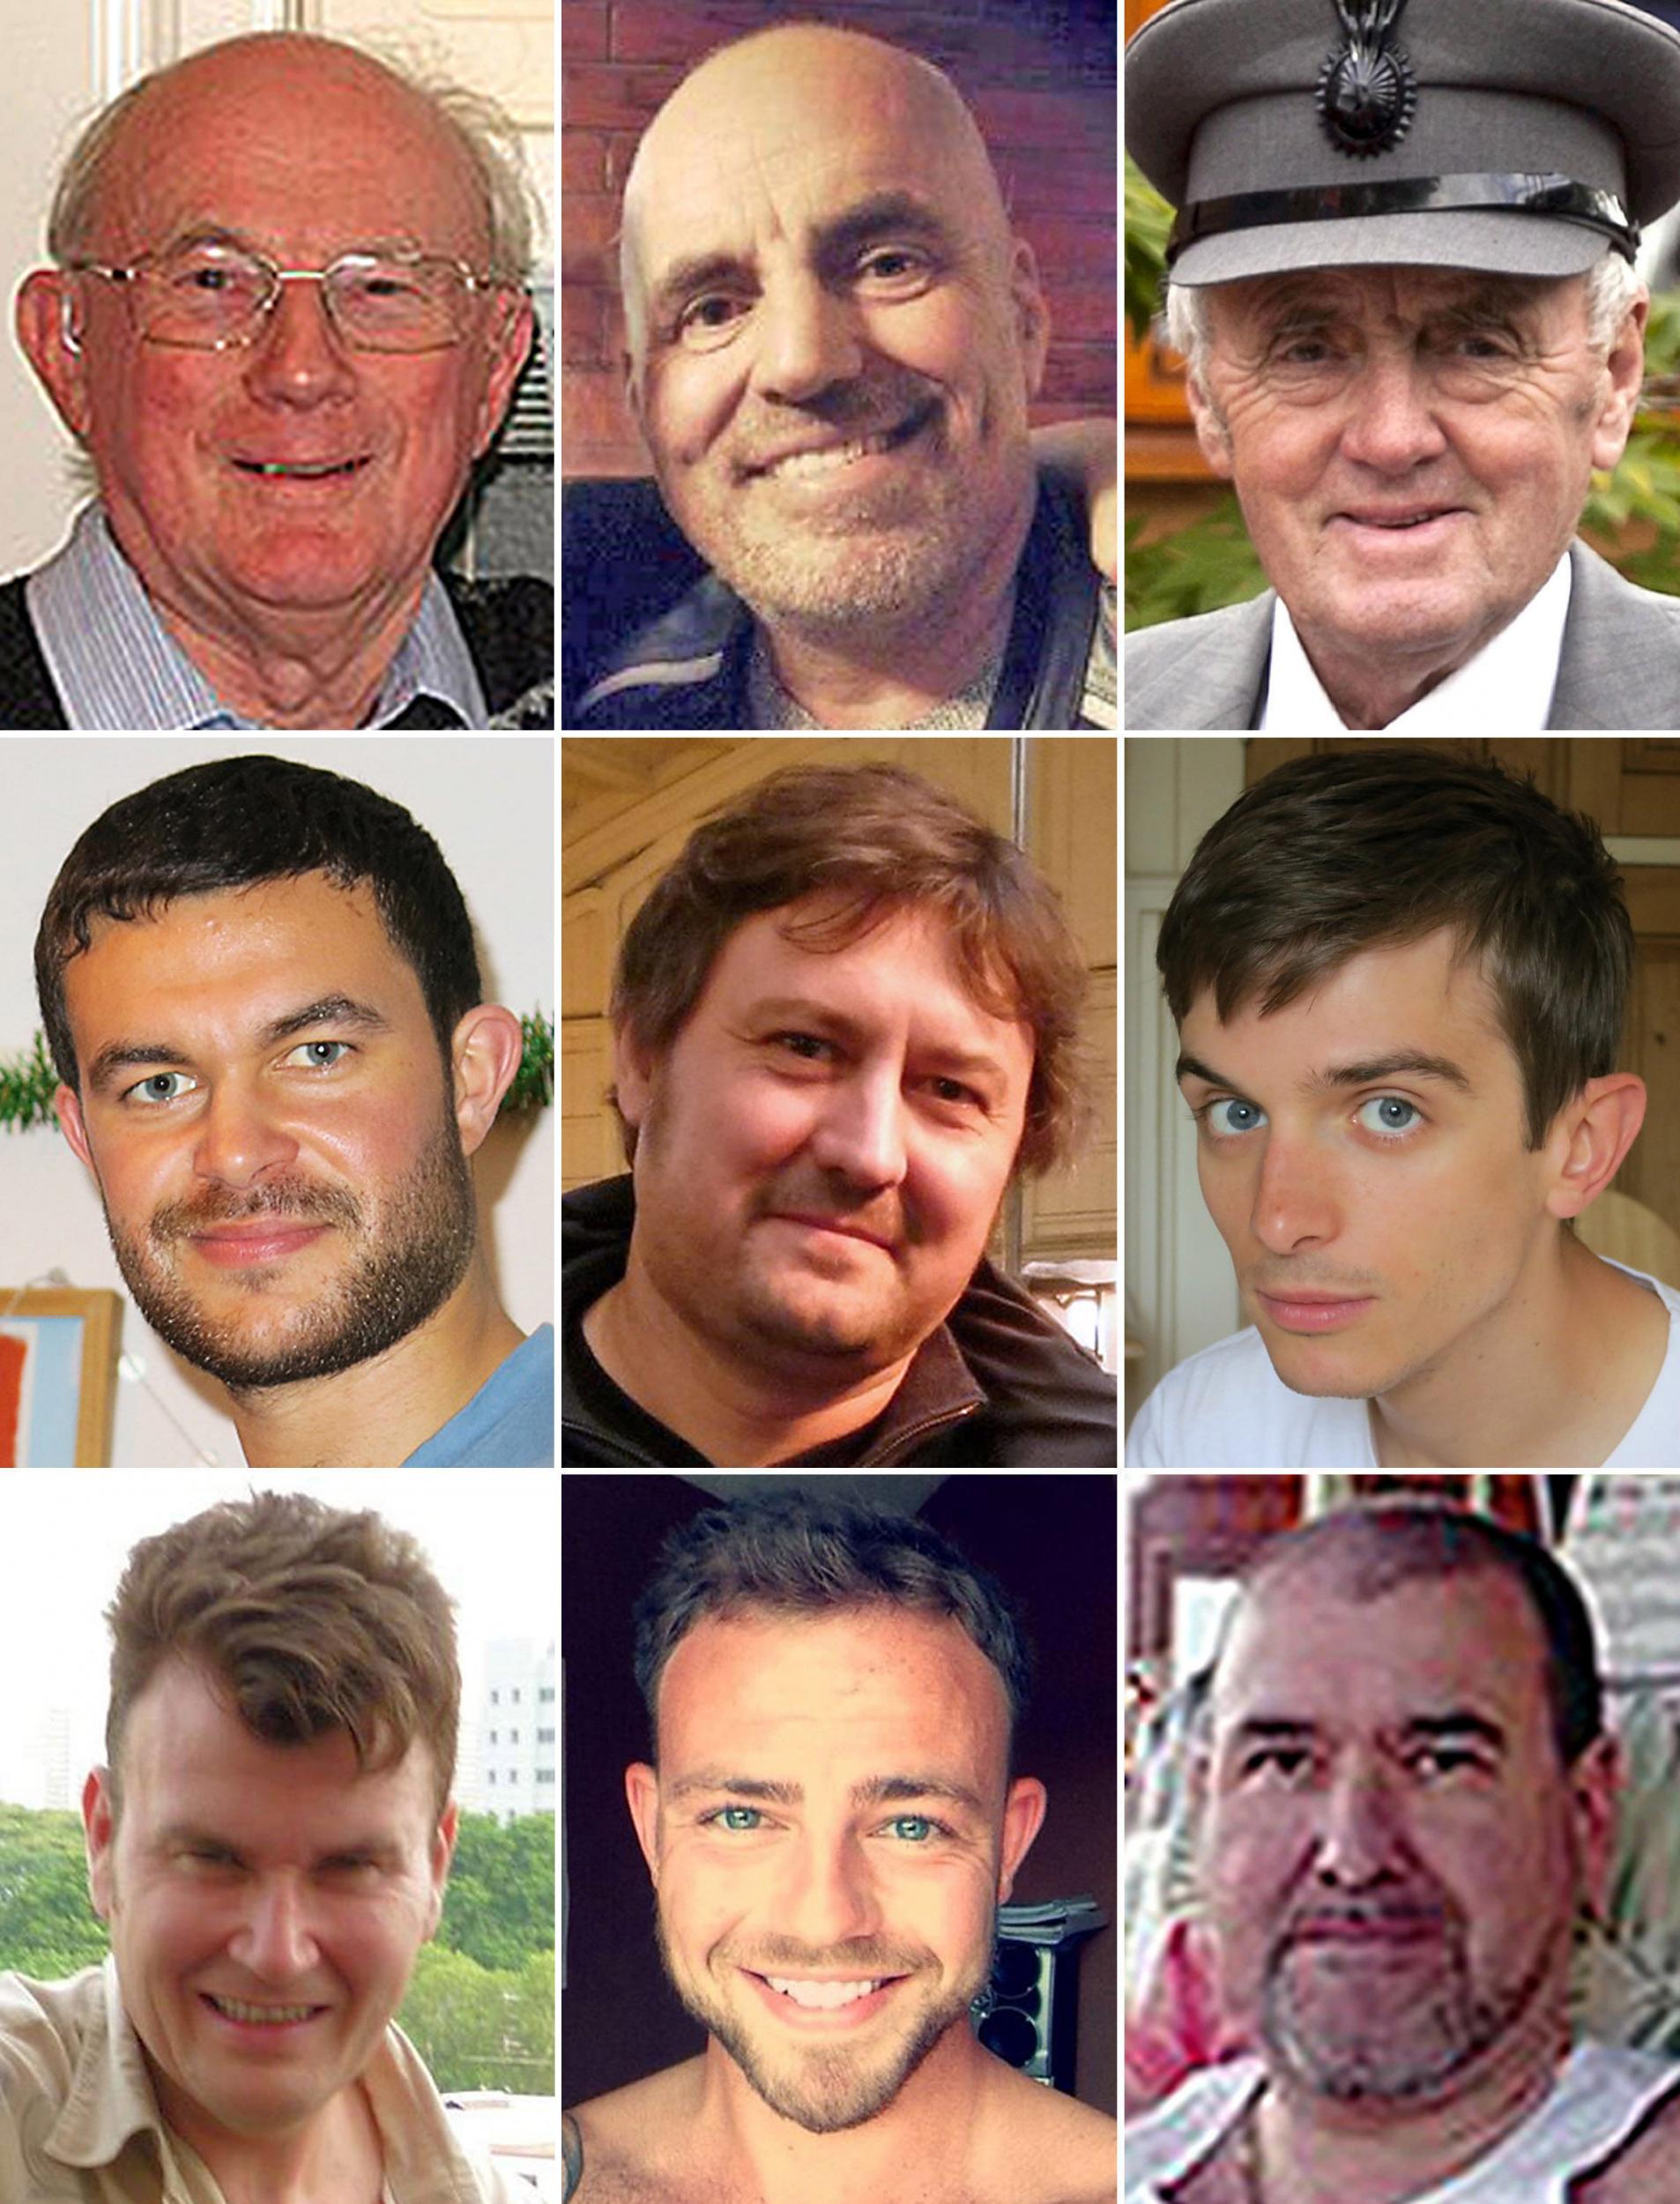 Those who died in the Shoreham air show crash included: (top row, left to right) Graham Mallinson, Mark Trussler and Maurice Abrahams, (middle row, left to right) Matthew Grimstone, Dylan Archer and Richard Smith, (bottom row, left to right) Tony Brightwell, Matt Jones and Mark Reeves. (PA)